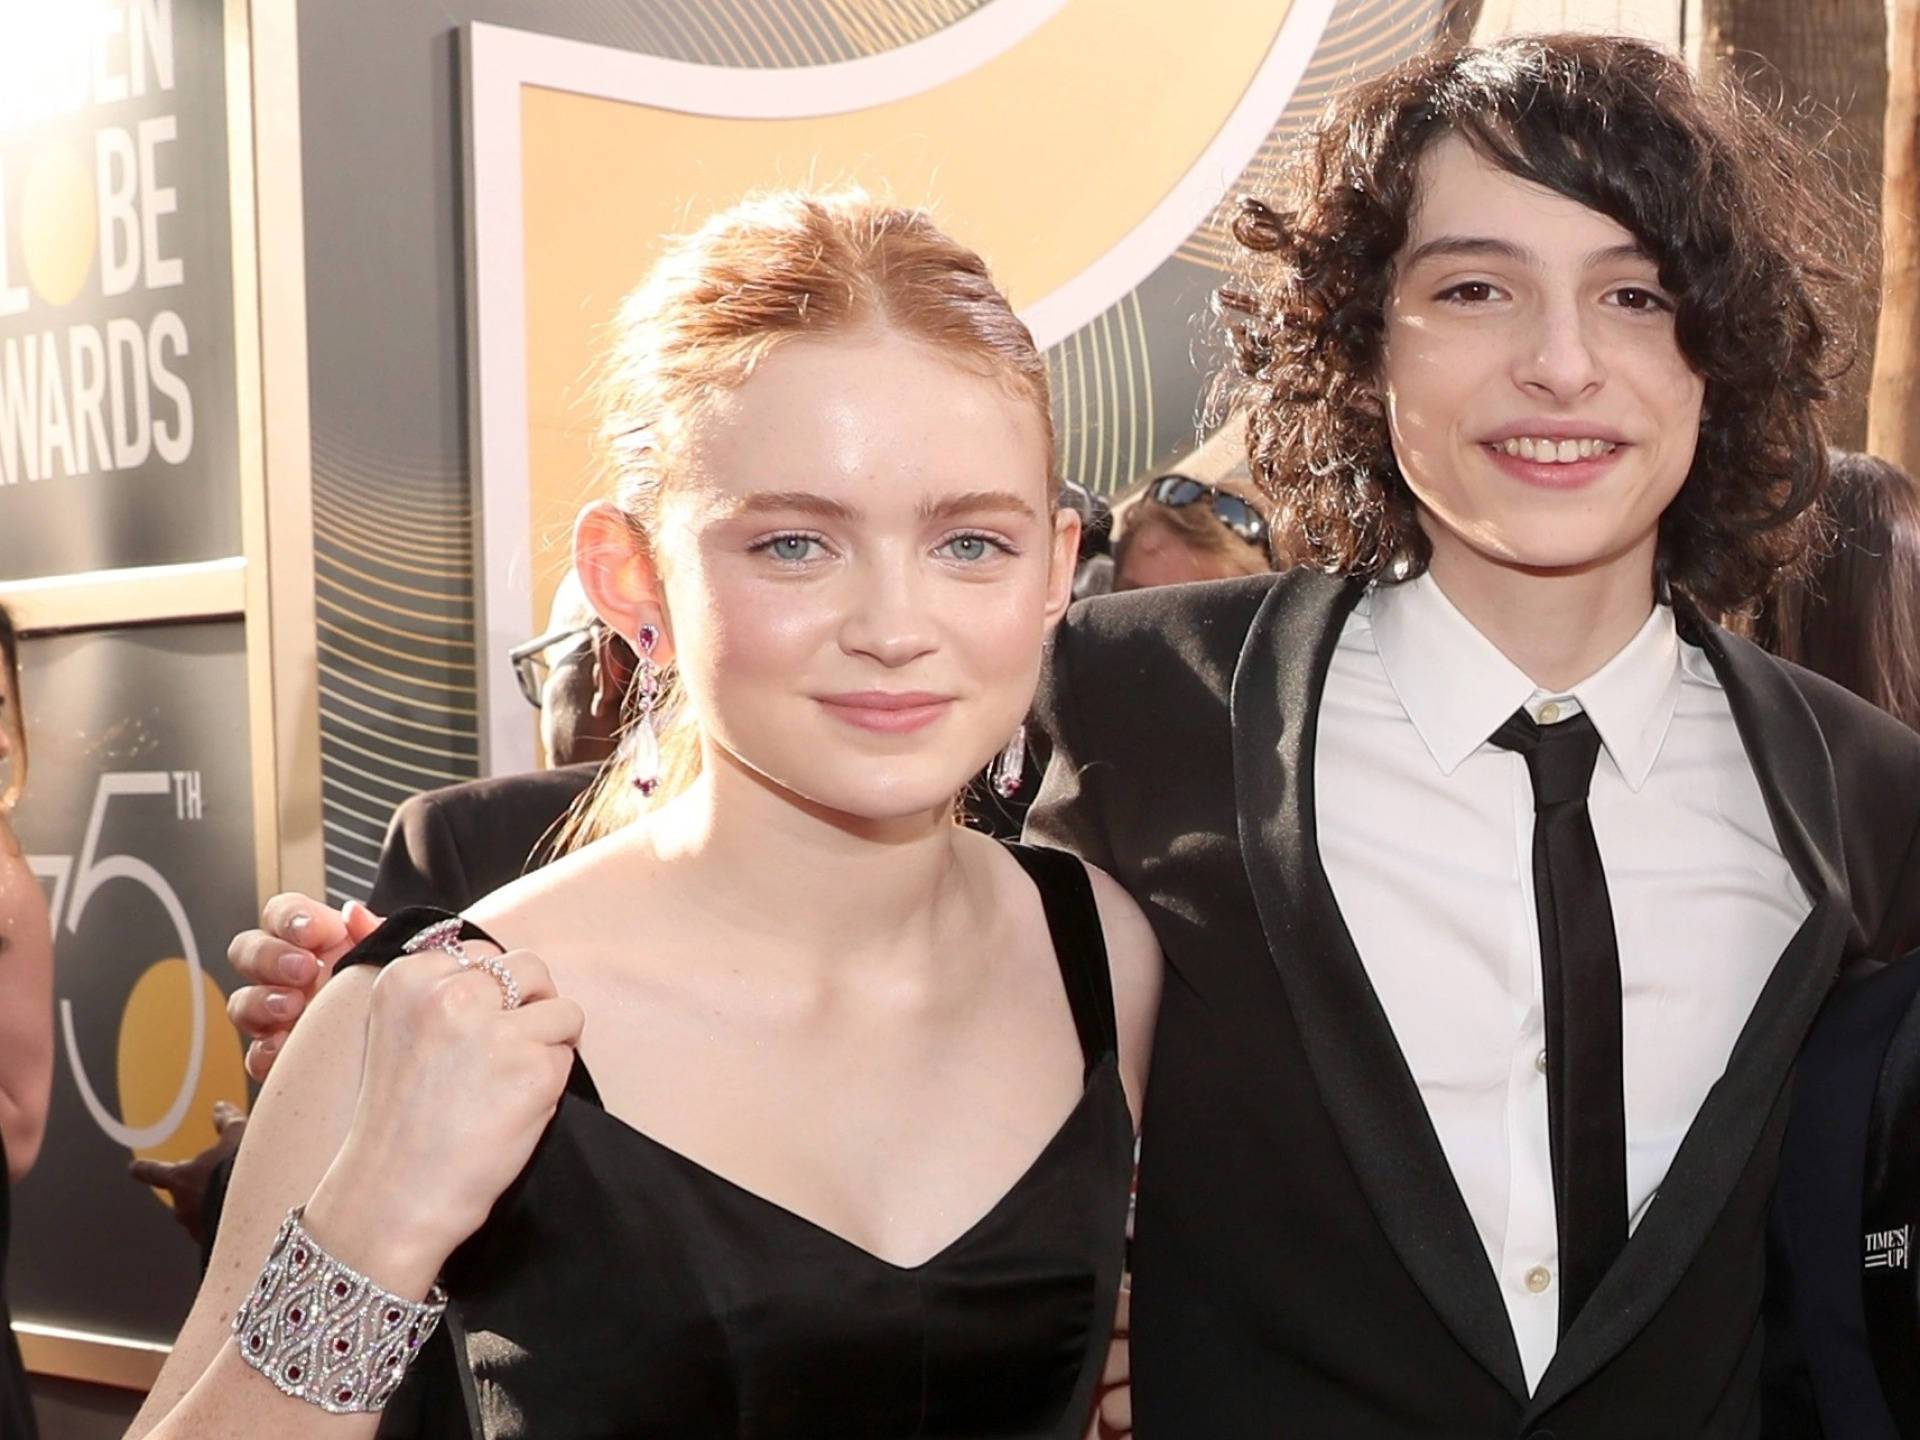 Finn Wolfhard With Co-star